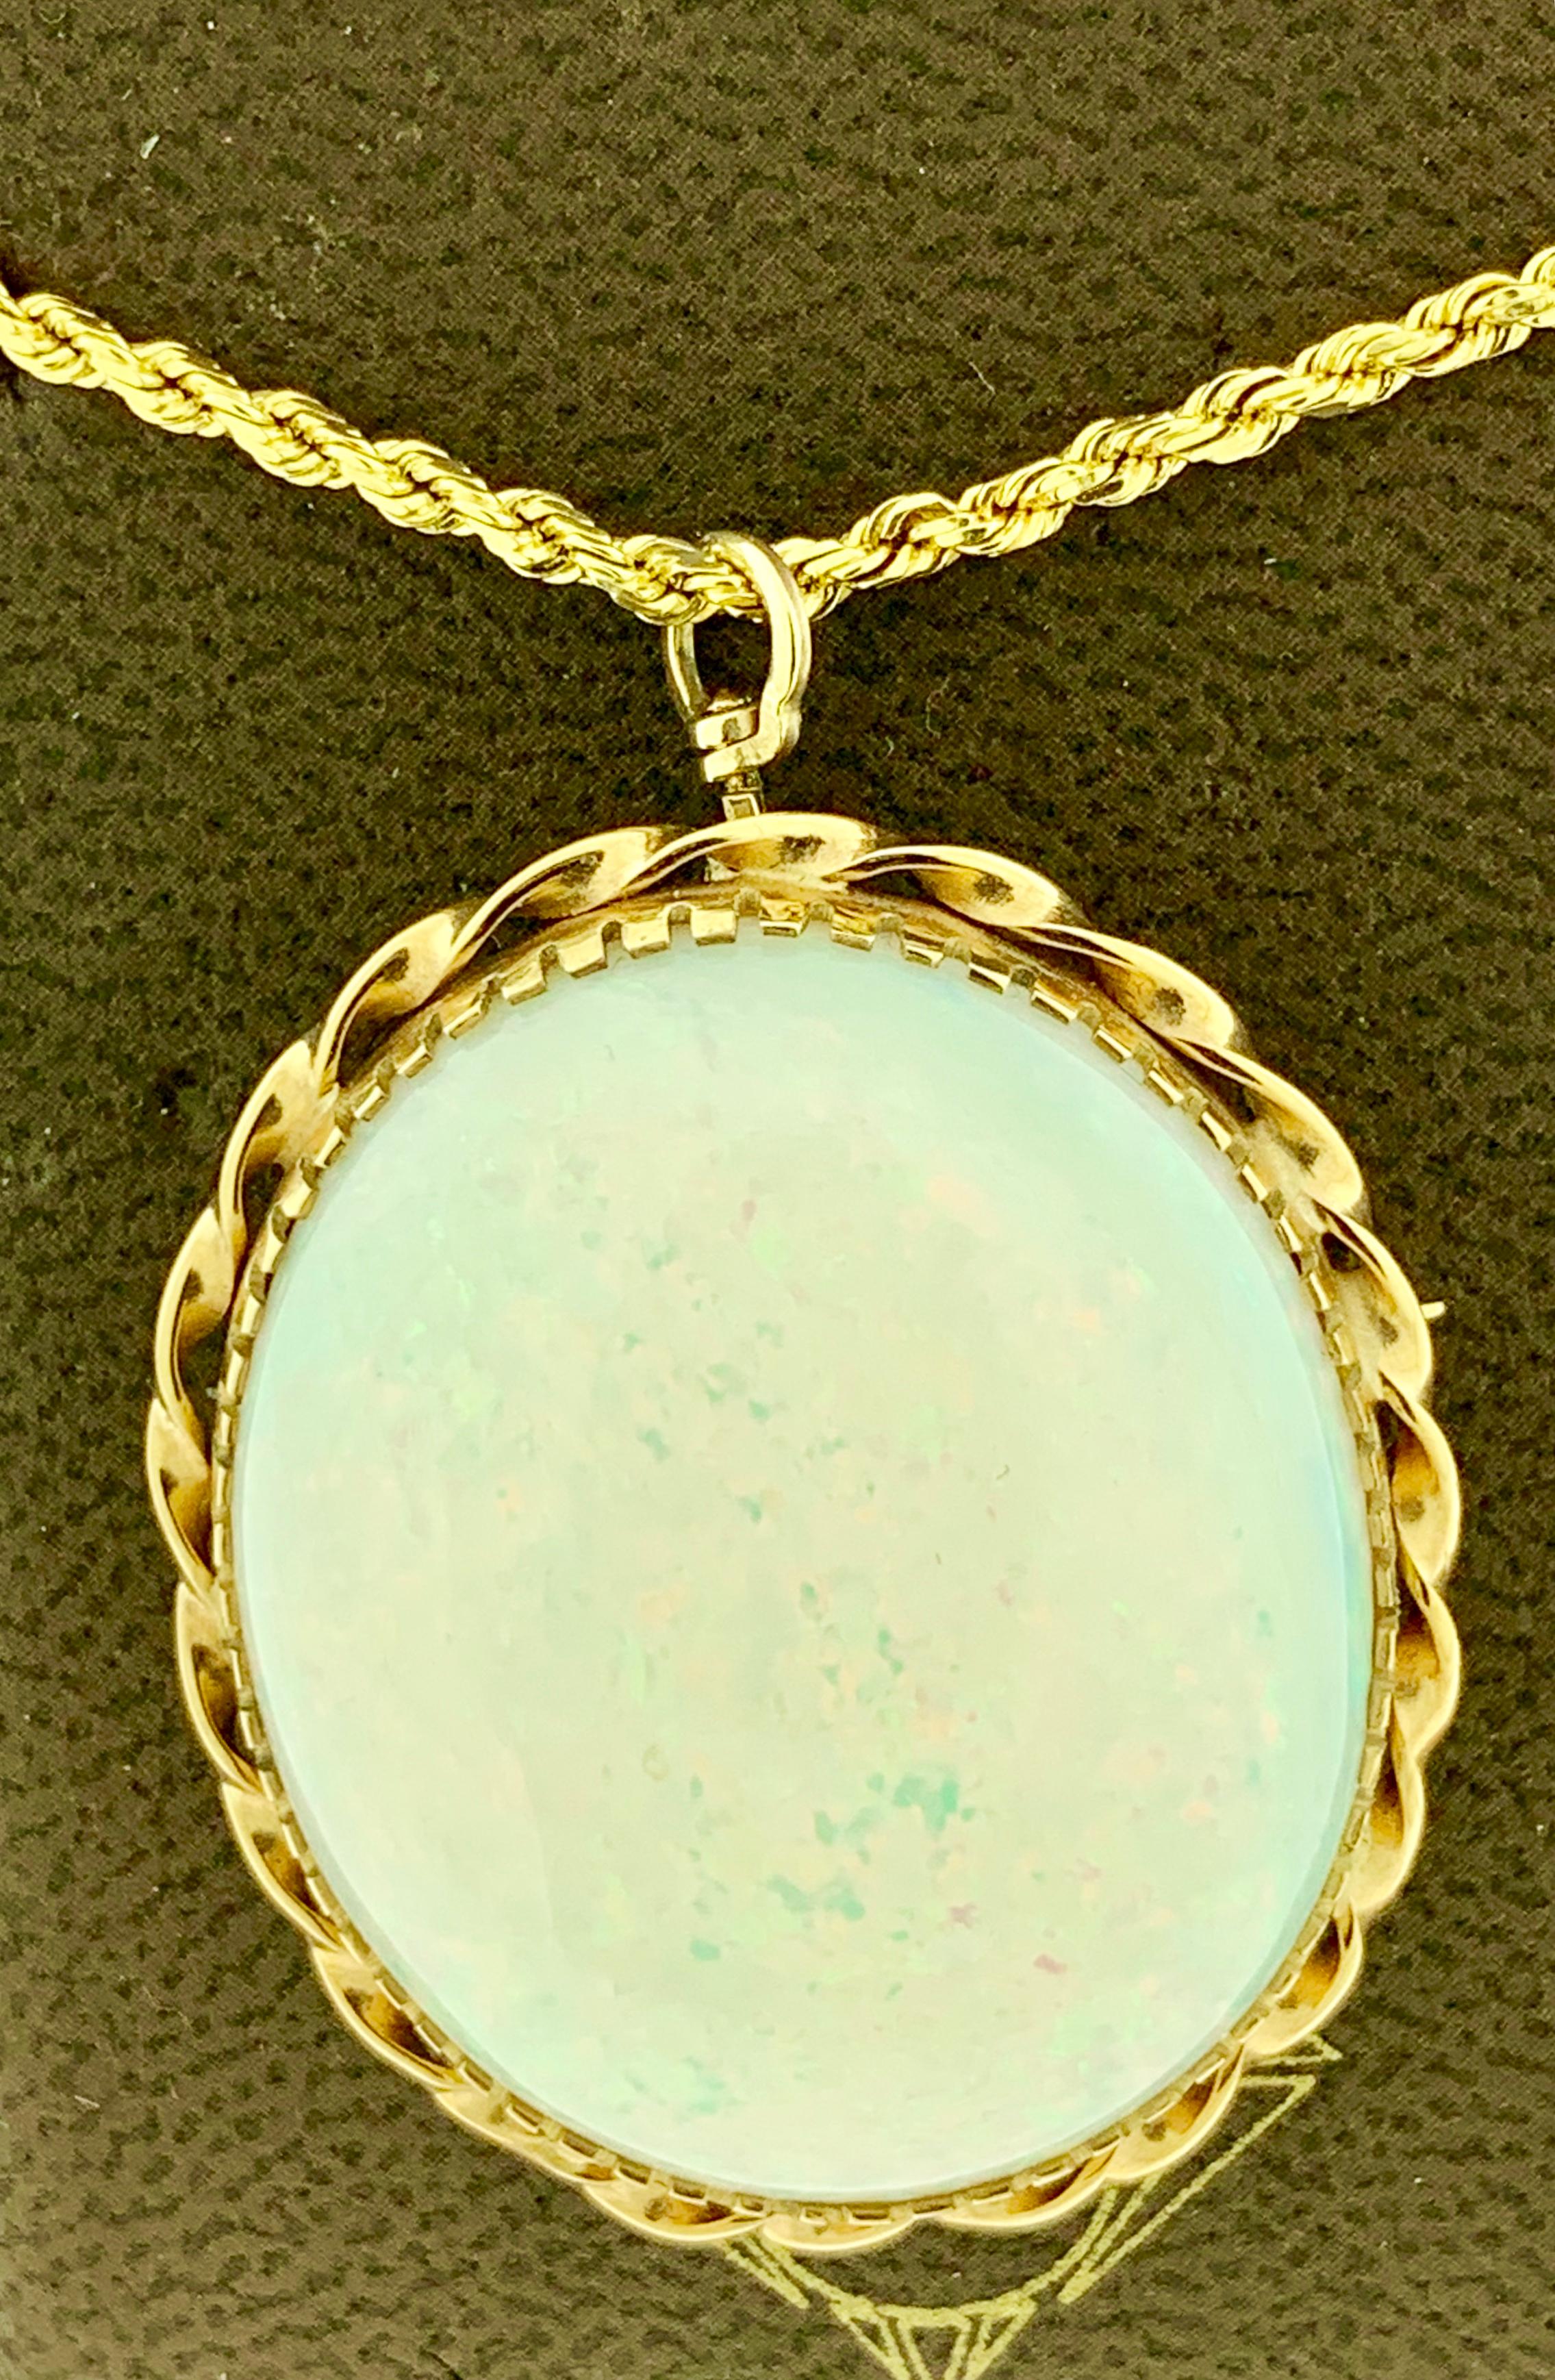  40 Carat  Oval Ethiopian  Opal  pin / Pendant Necklace 14 Karat Yellow Gold Estate 
This spectacular Pendant Necklace  consisting of a single Oval    Shape Ethiopian  Opal Approximately 40 Carat.  This can be worn as pin or as a Pendant
very clean